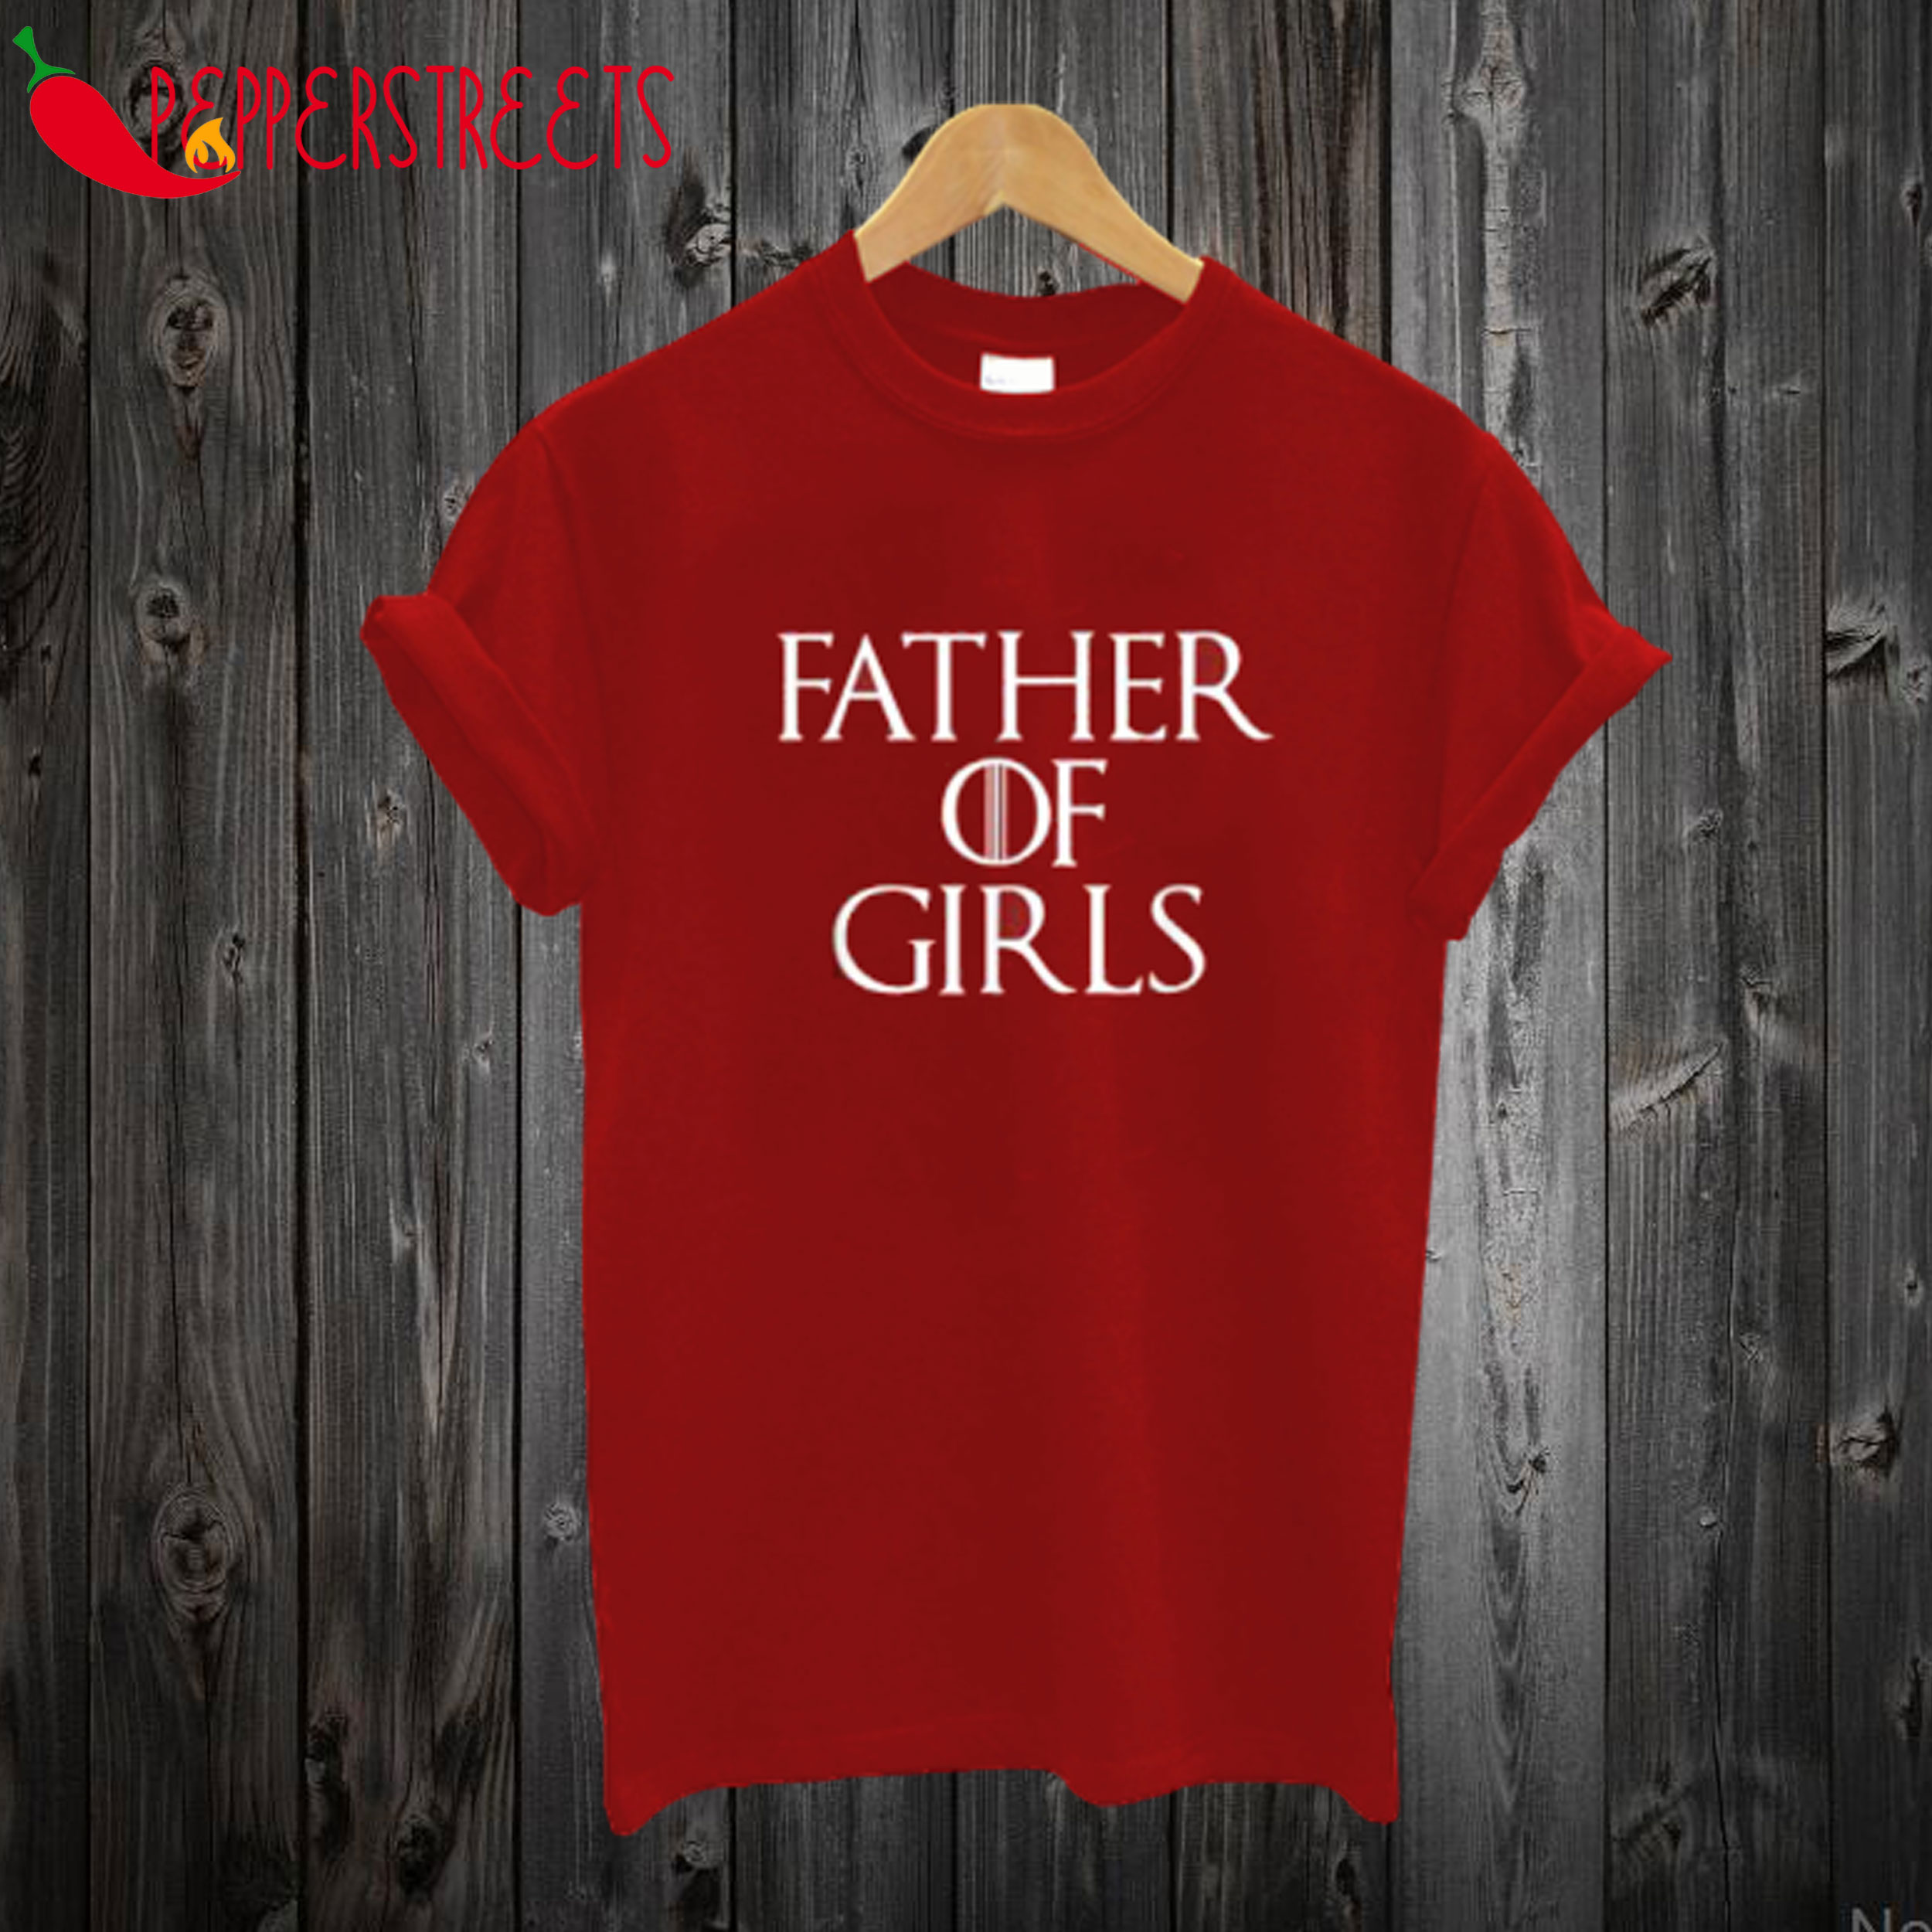 Father of Girls T shirt